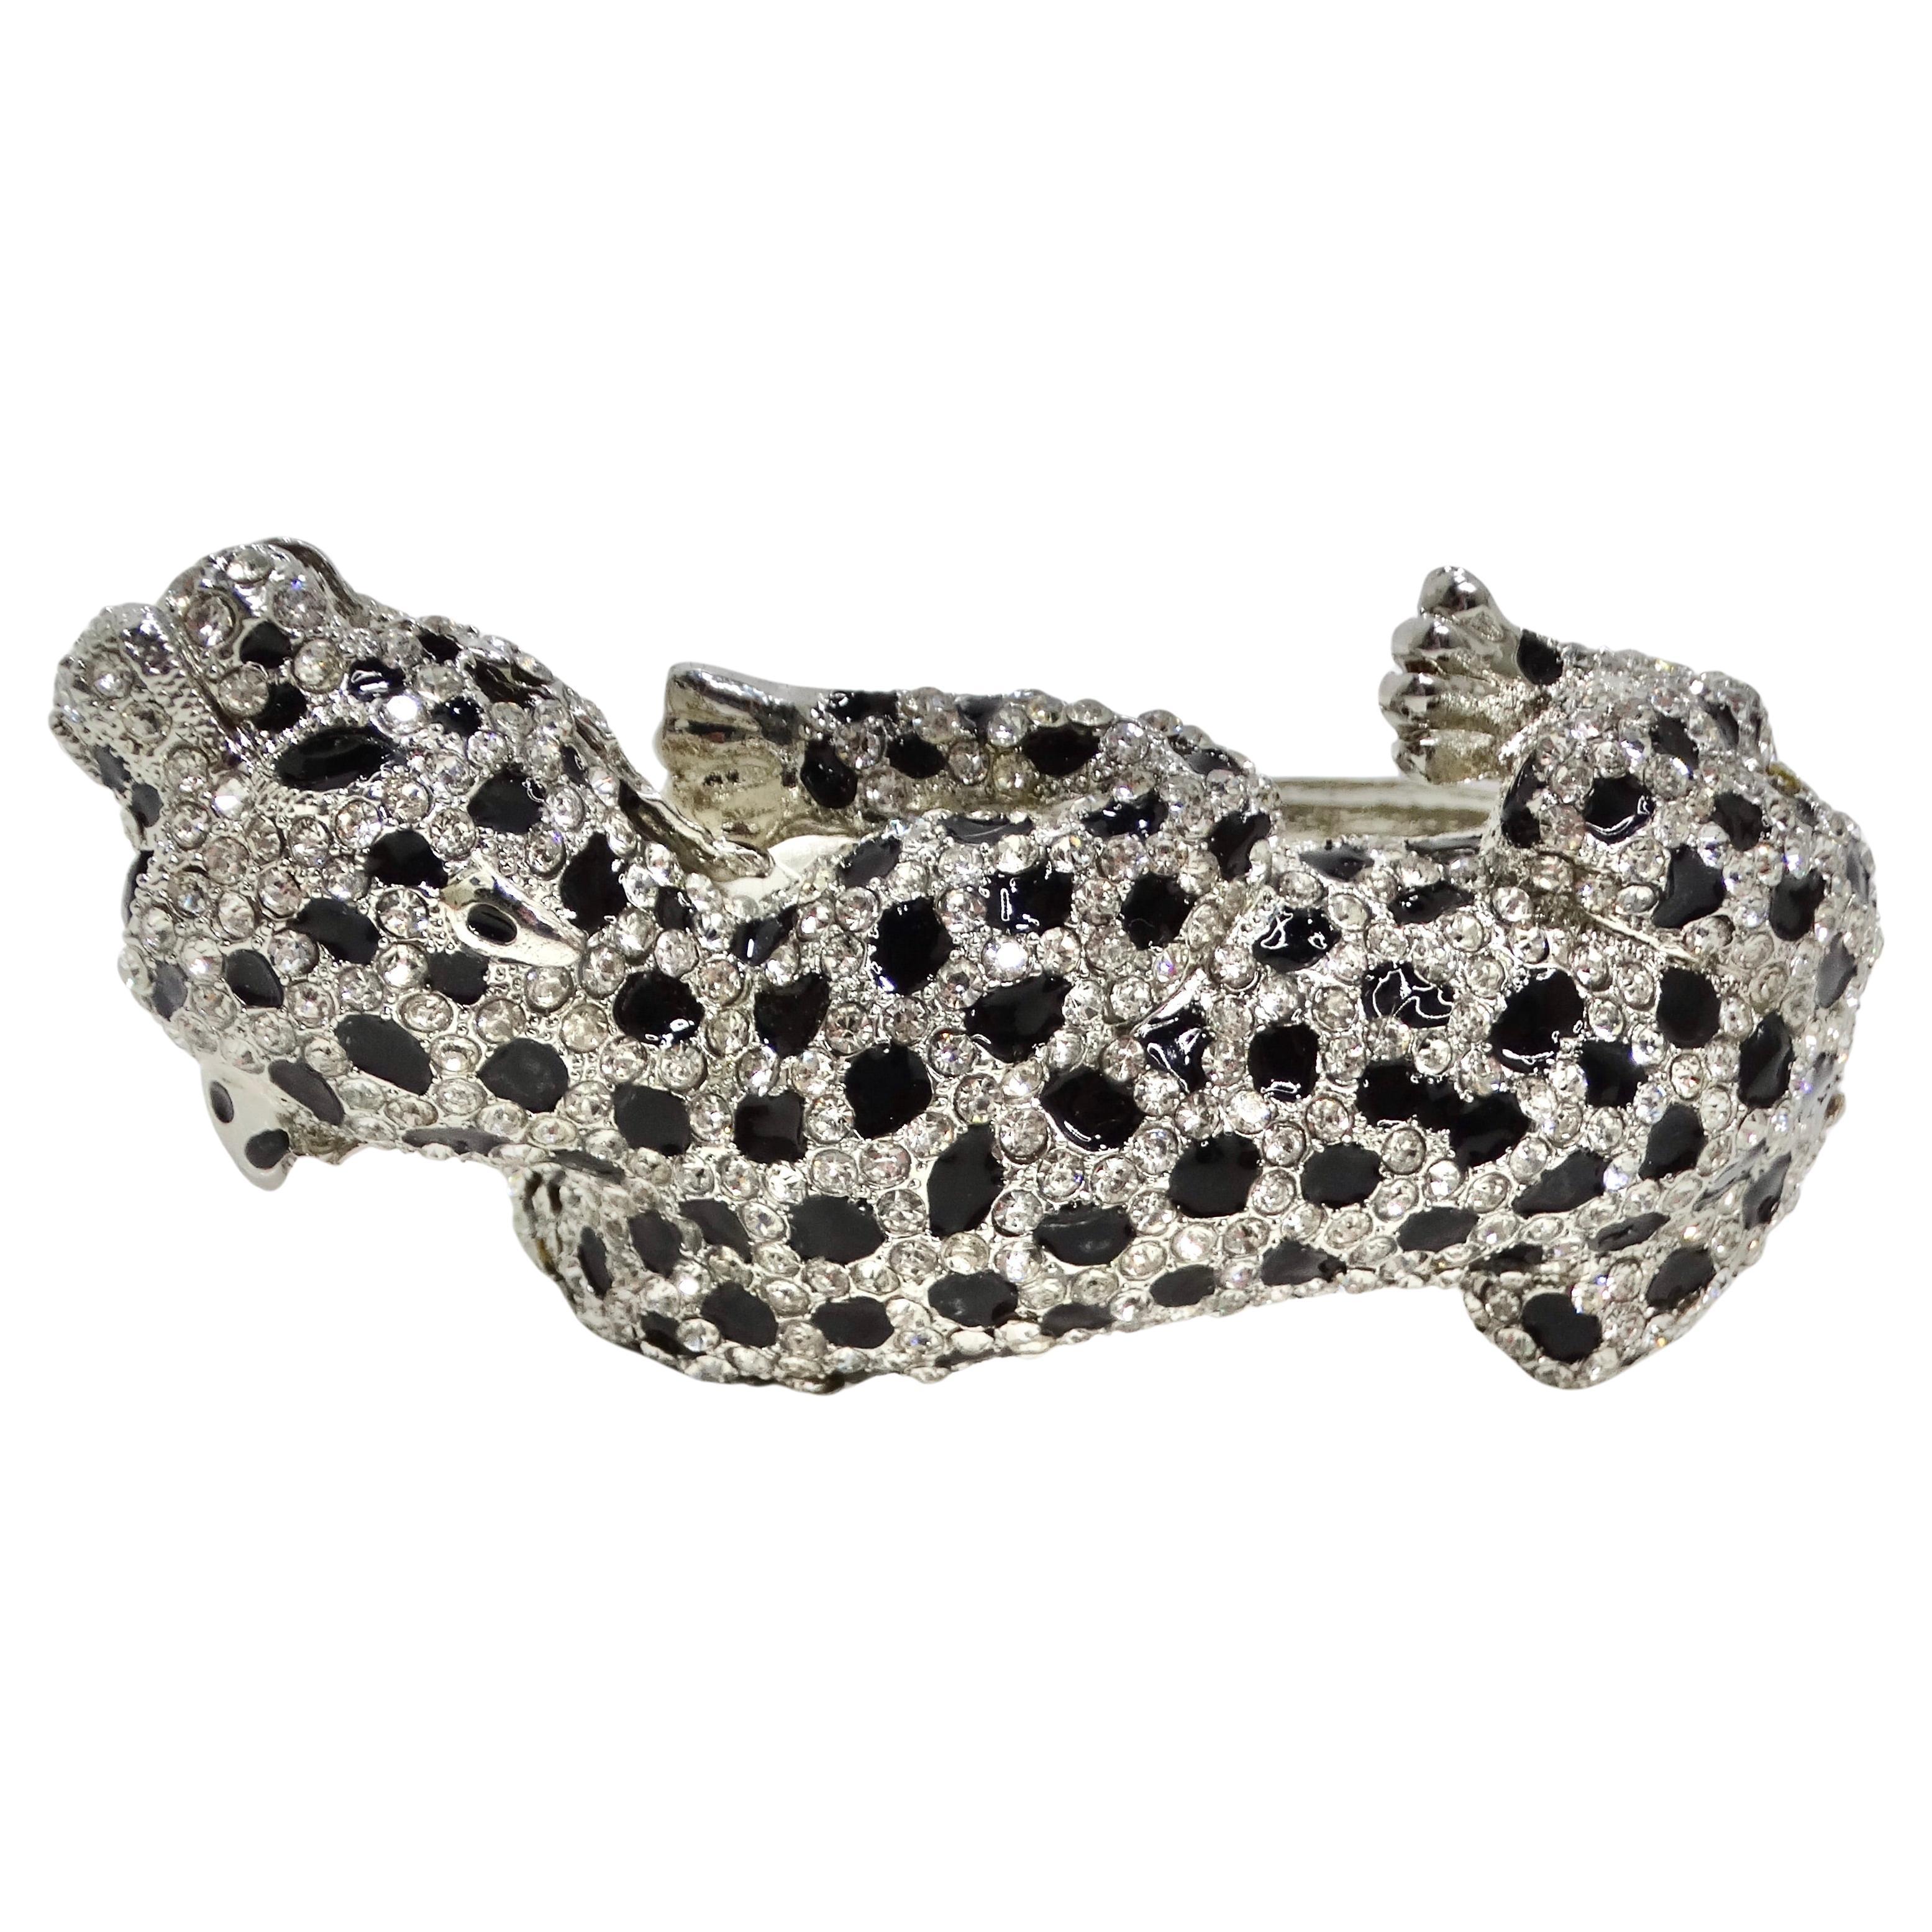 1990s Cartier Inspired Rhinestone Panther Cuff Bracelet For Sale